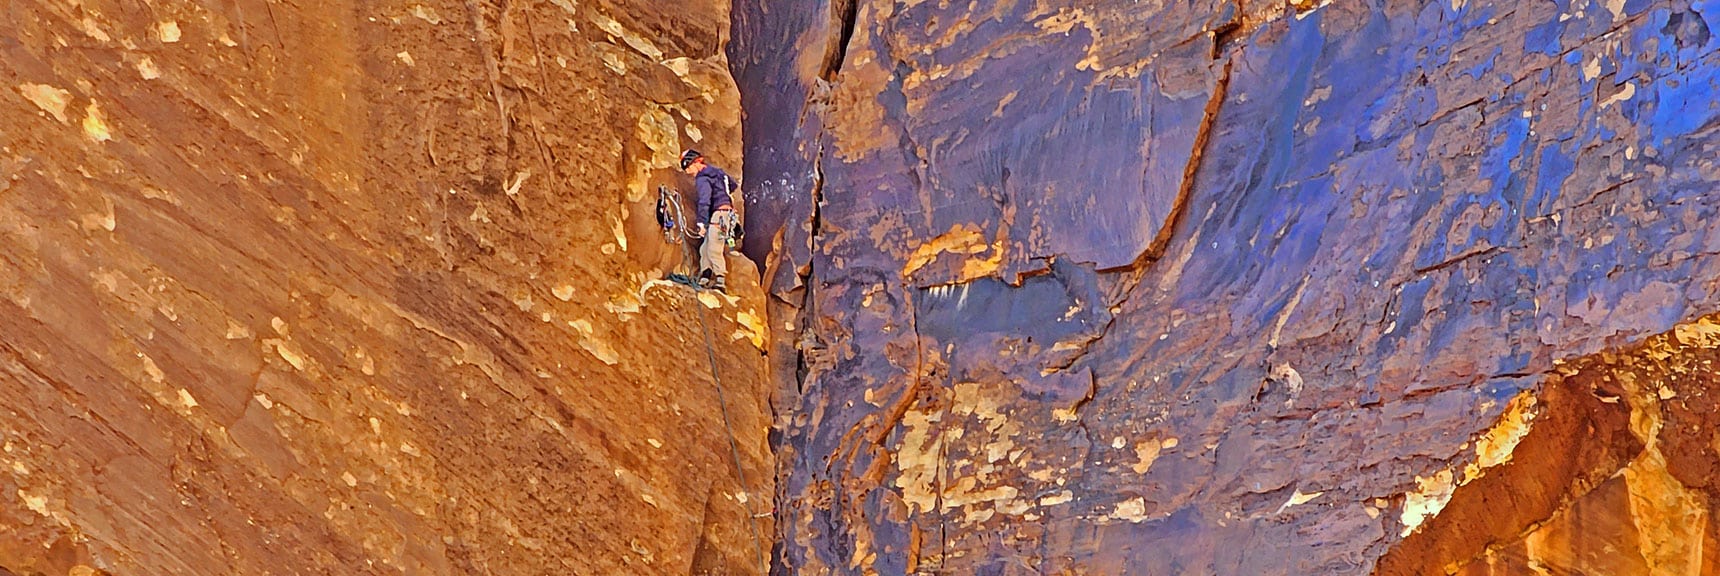 Lead Climber Must Free Climb to Set Ropes and Anchors for the Others. | Rock Climber Observations | Pine Creek Canyon | Rainbow Mountain Wilderness, Nevada